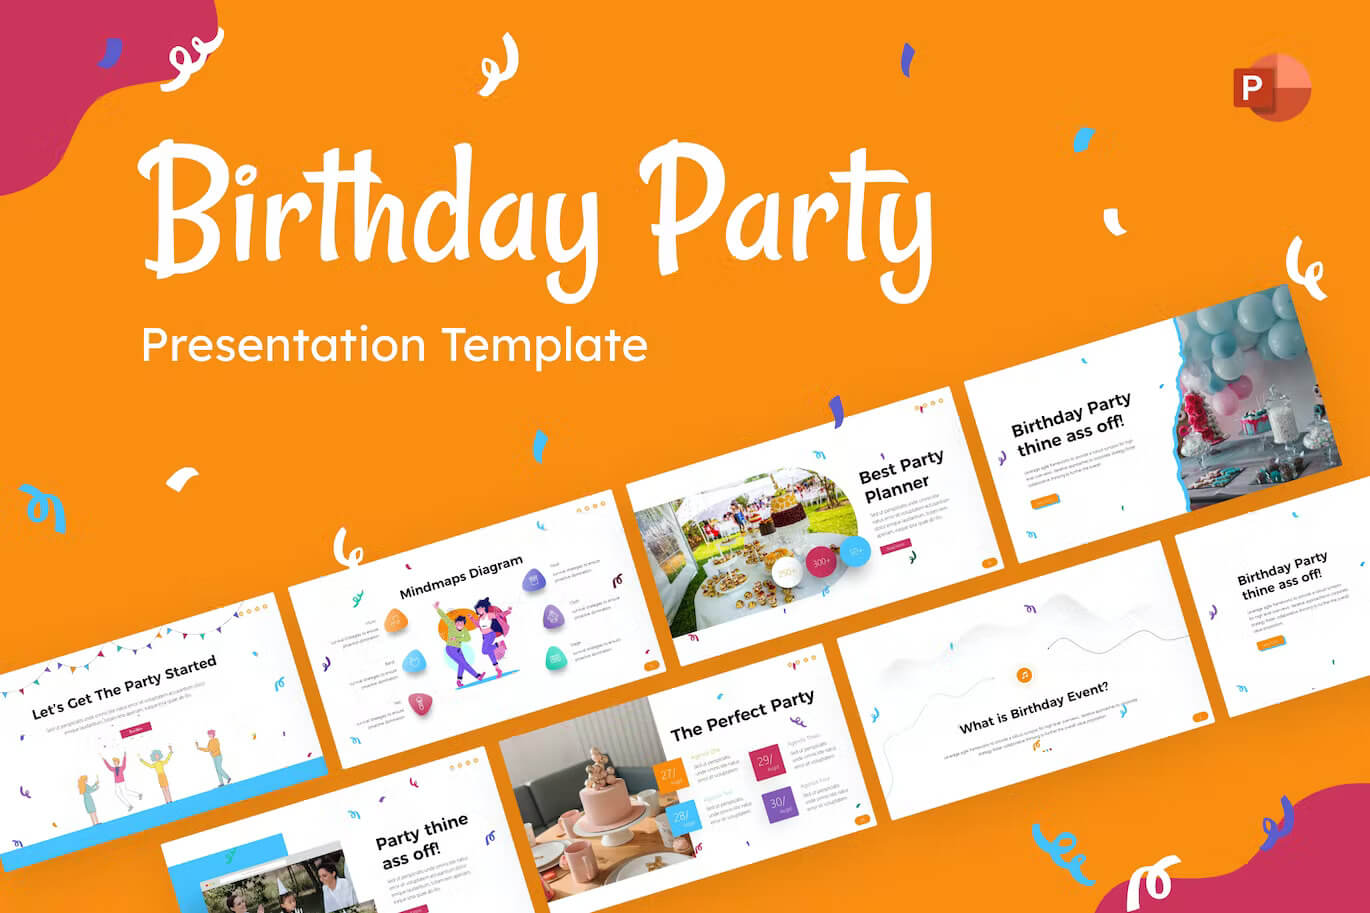 Happy Birthday event with Birthday Party Creative PowerPoint Template.